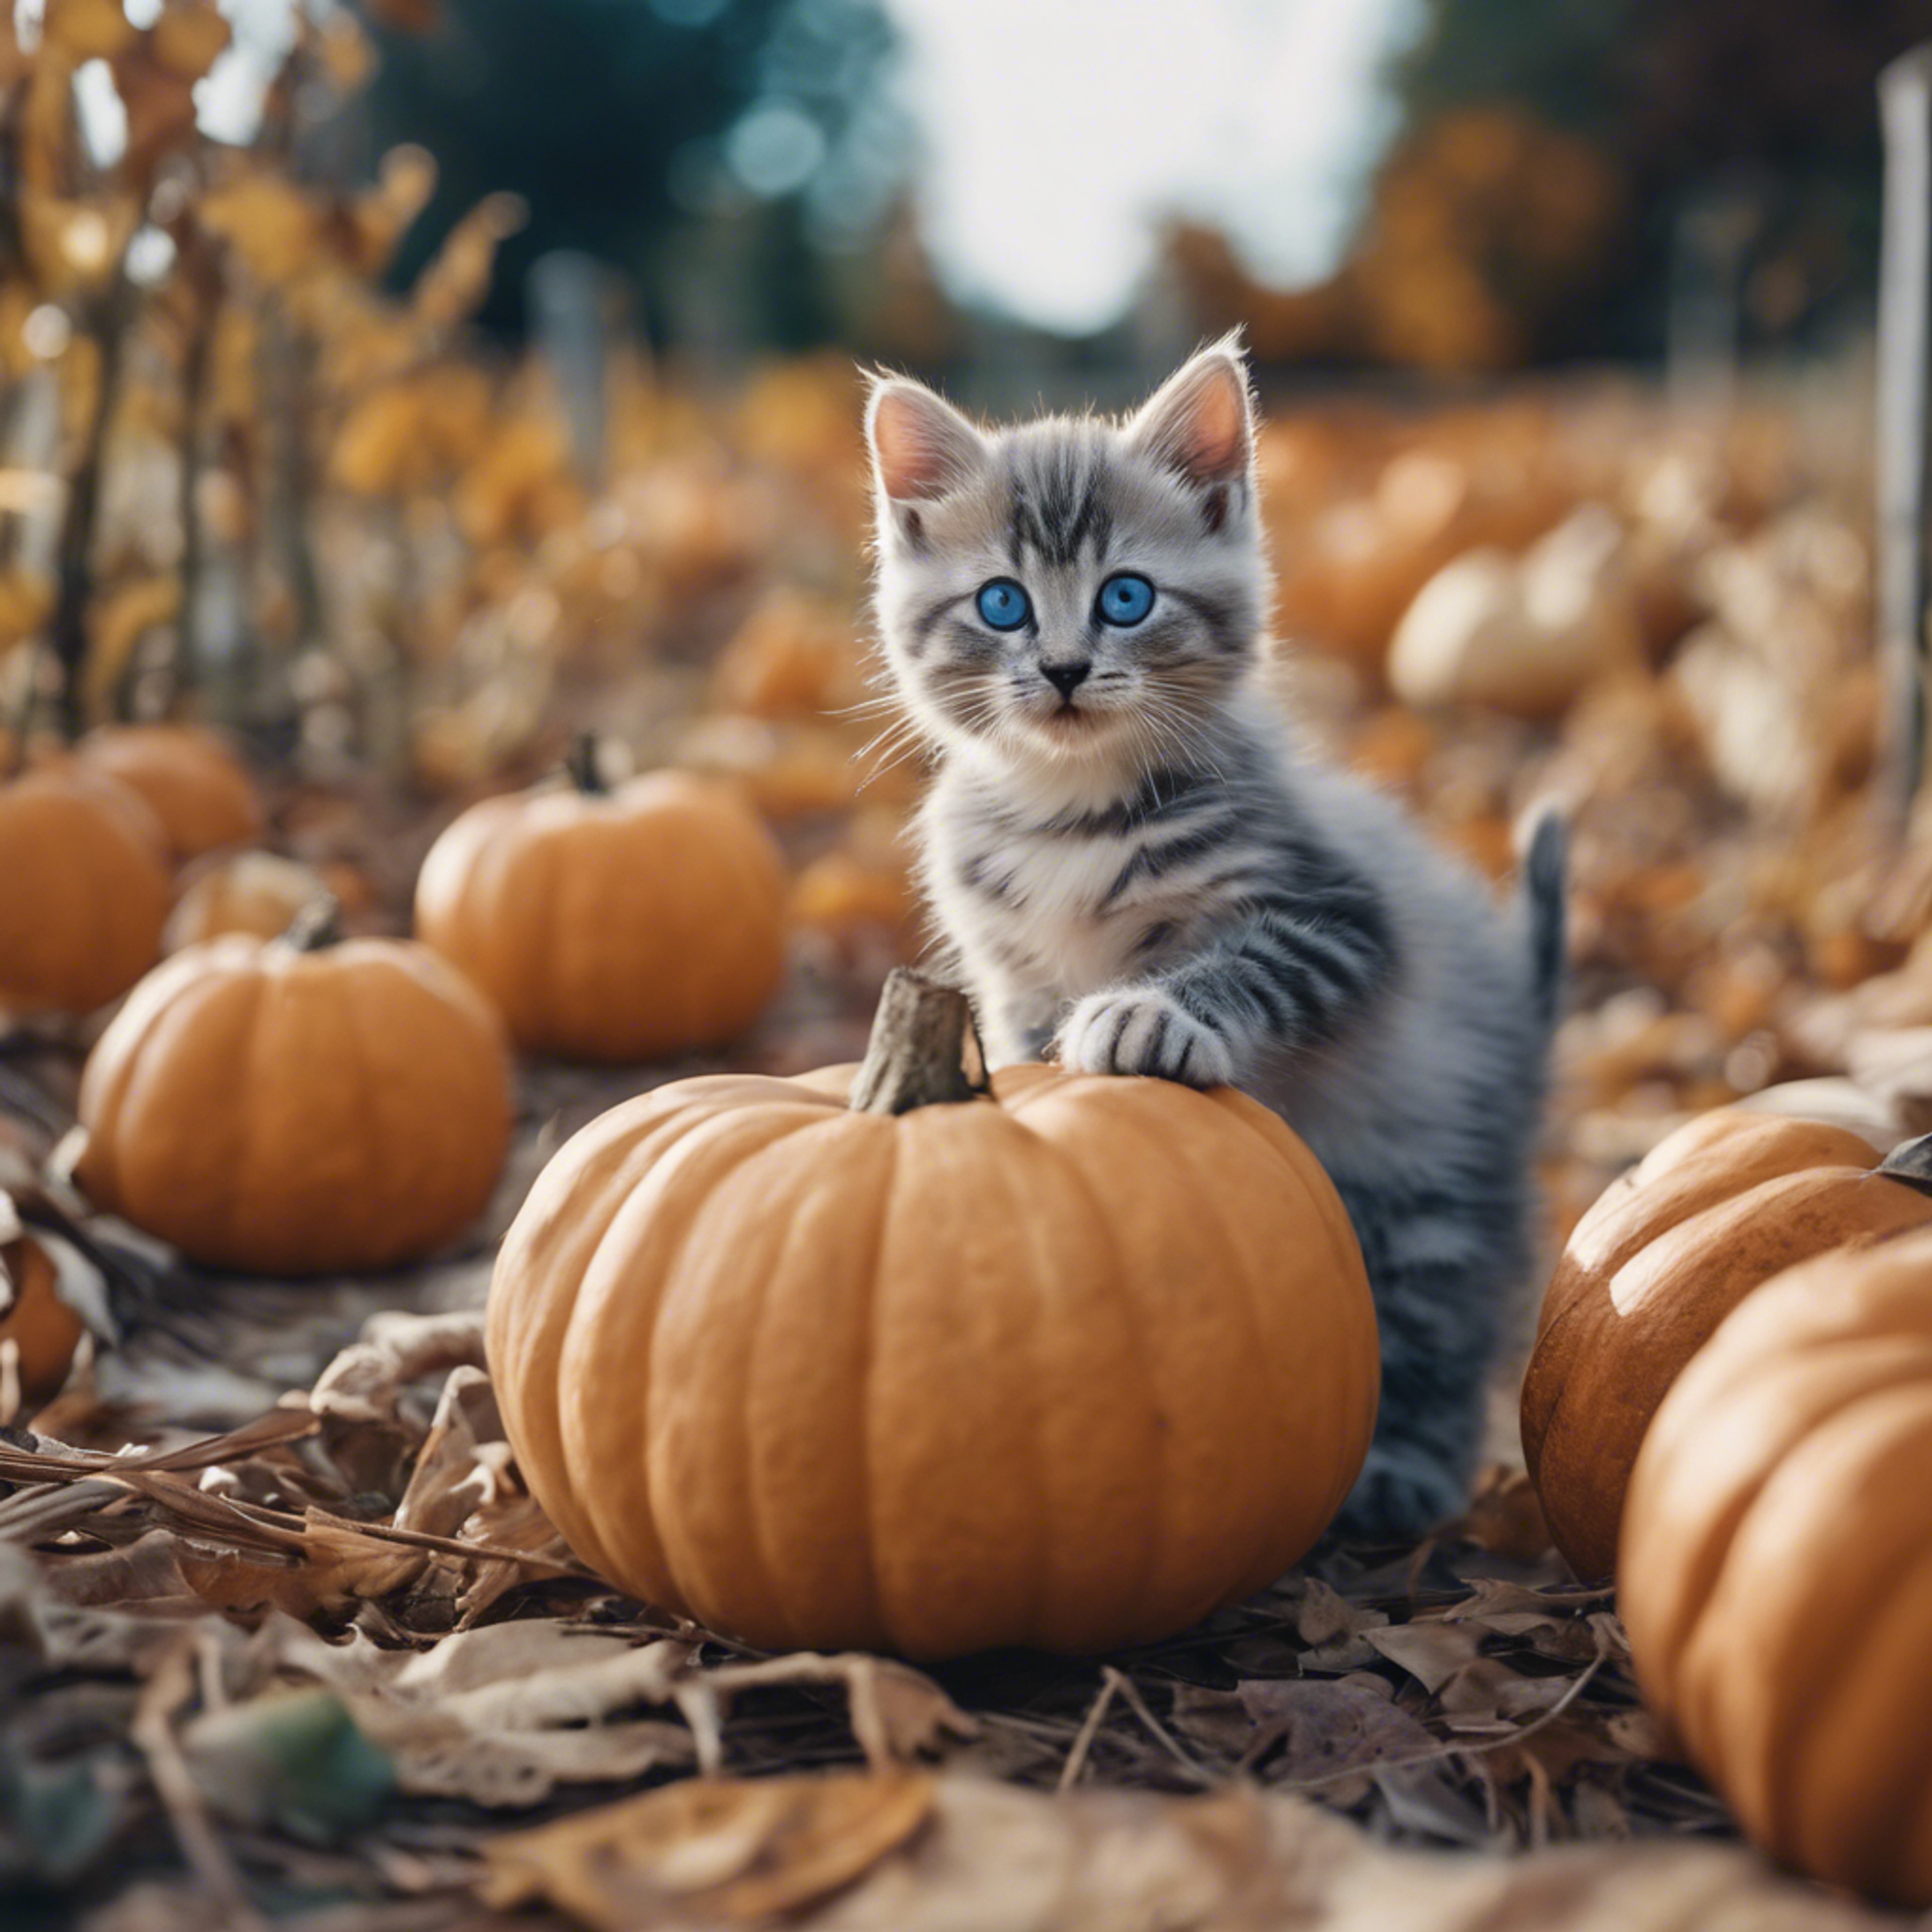 A small blue-eyed Cheetoh kitten exploring a pumpkin patch on an invitingly cool fall day. Tapet[ee8fc80847a940e288a7]